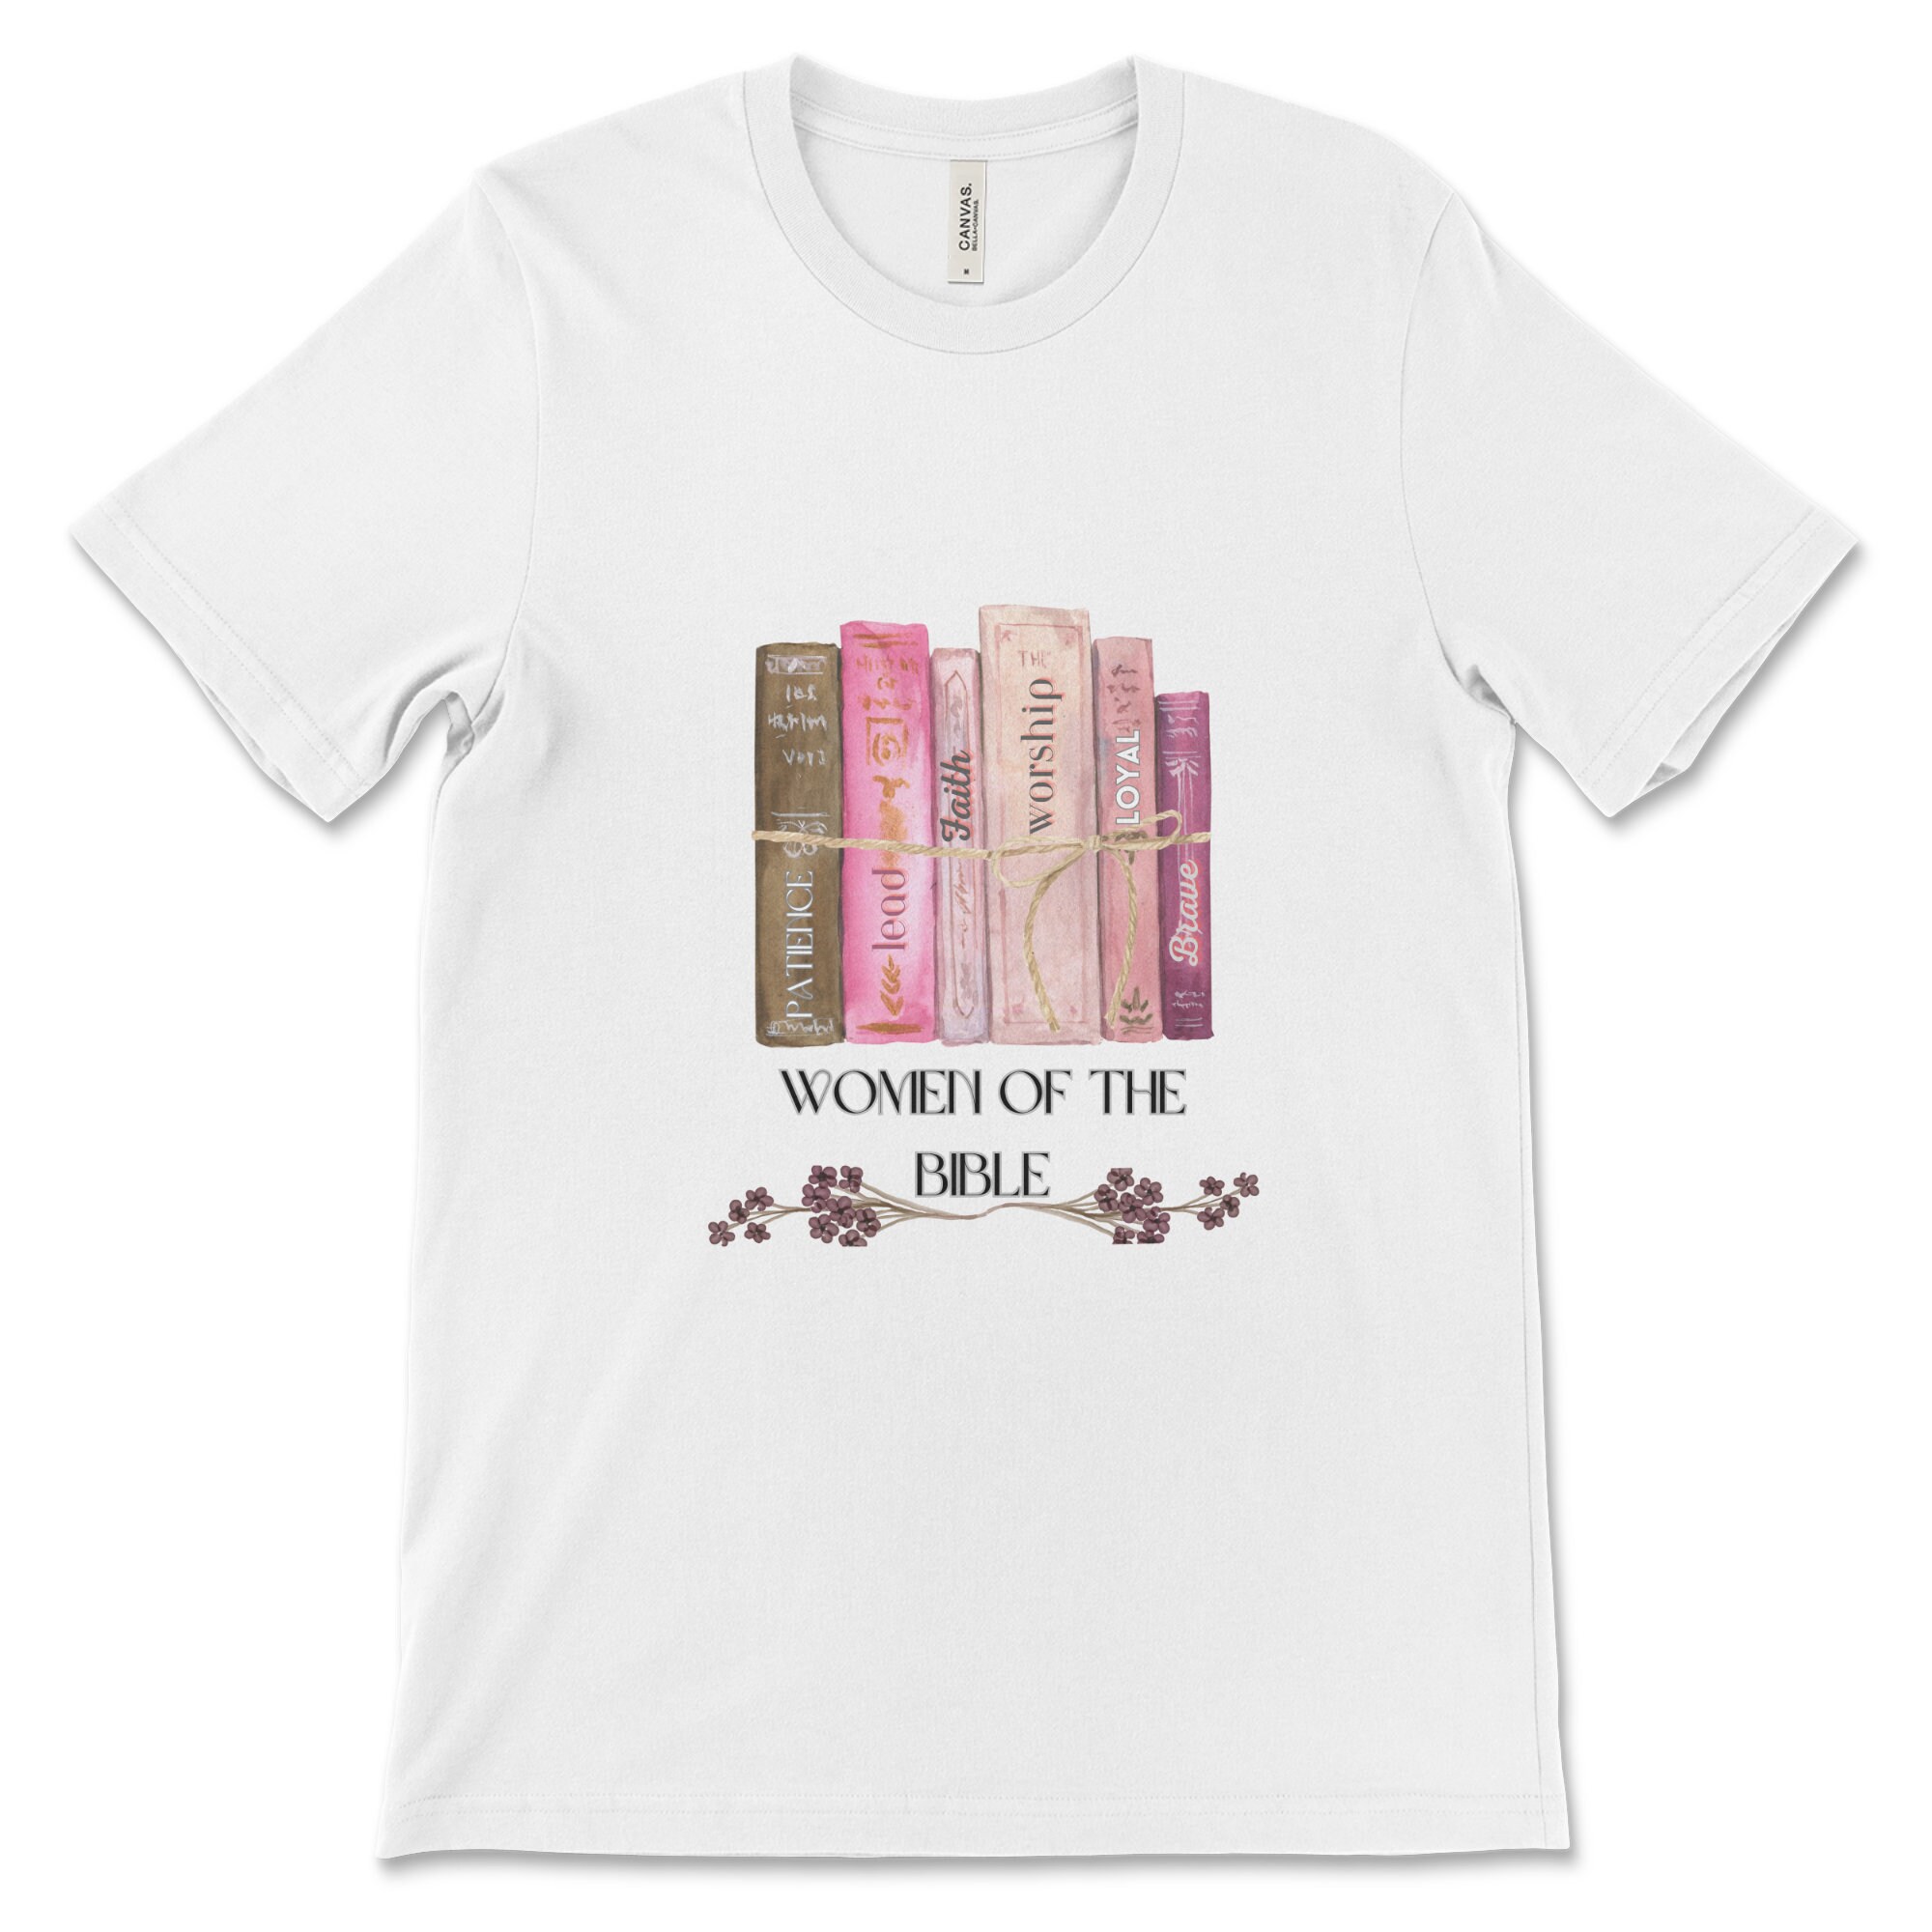 Women of the Bible Tshirt Women of the Bible Full Color Tee - Etsy